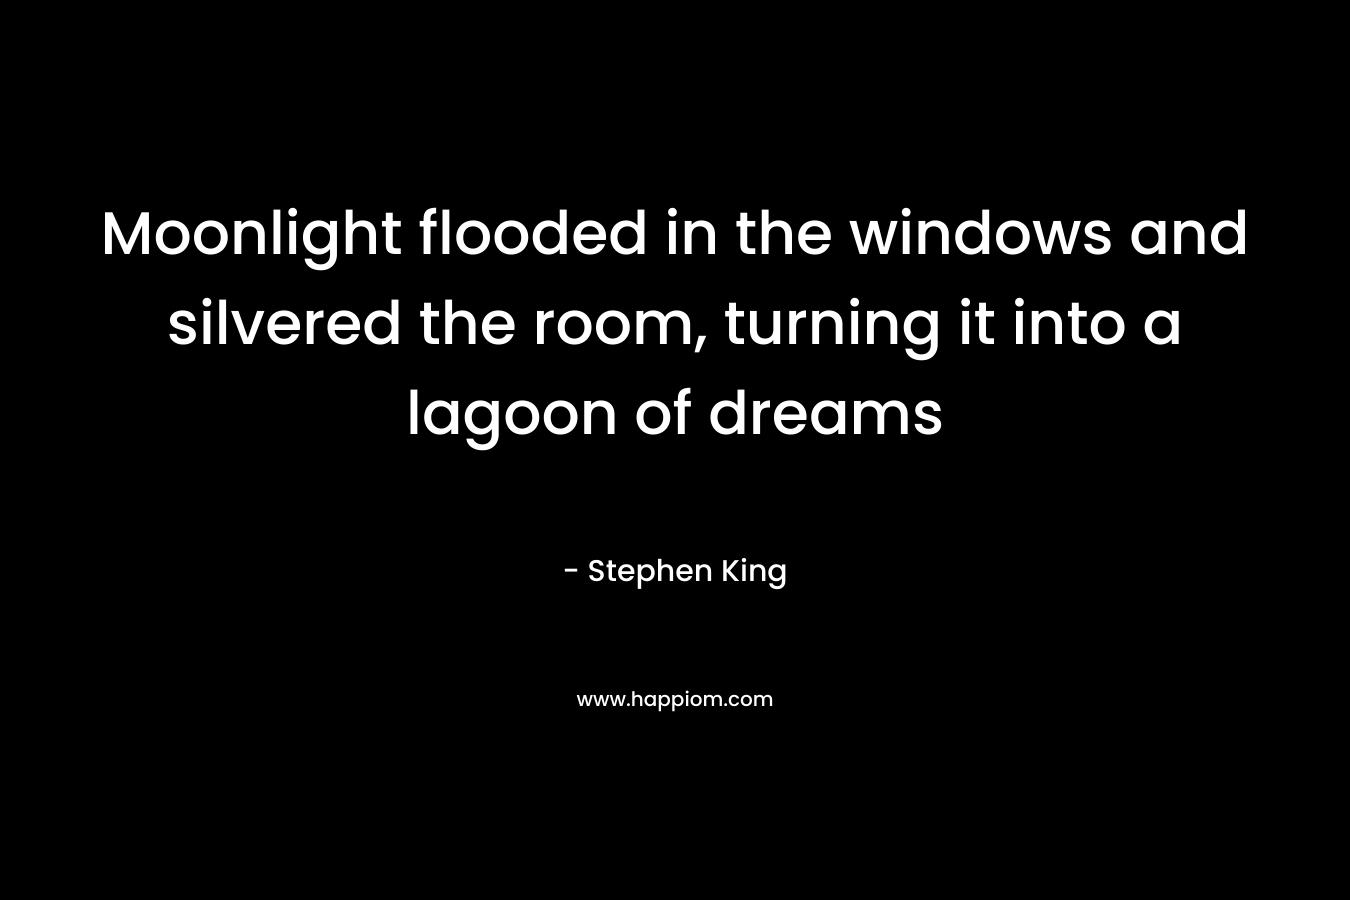 Moonlight flooded in the windows and silvered the room, turning it into a lagoon of dreams